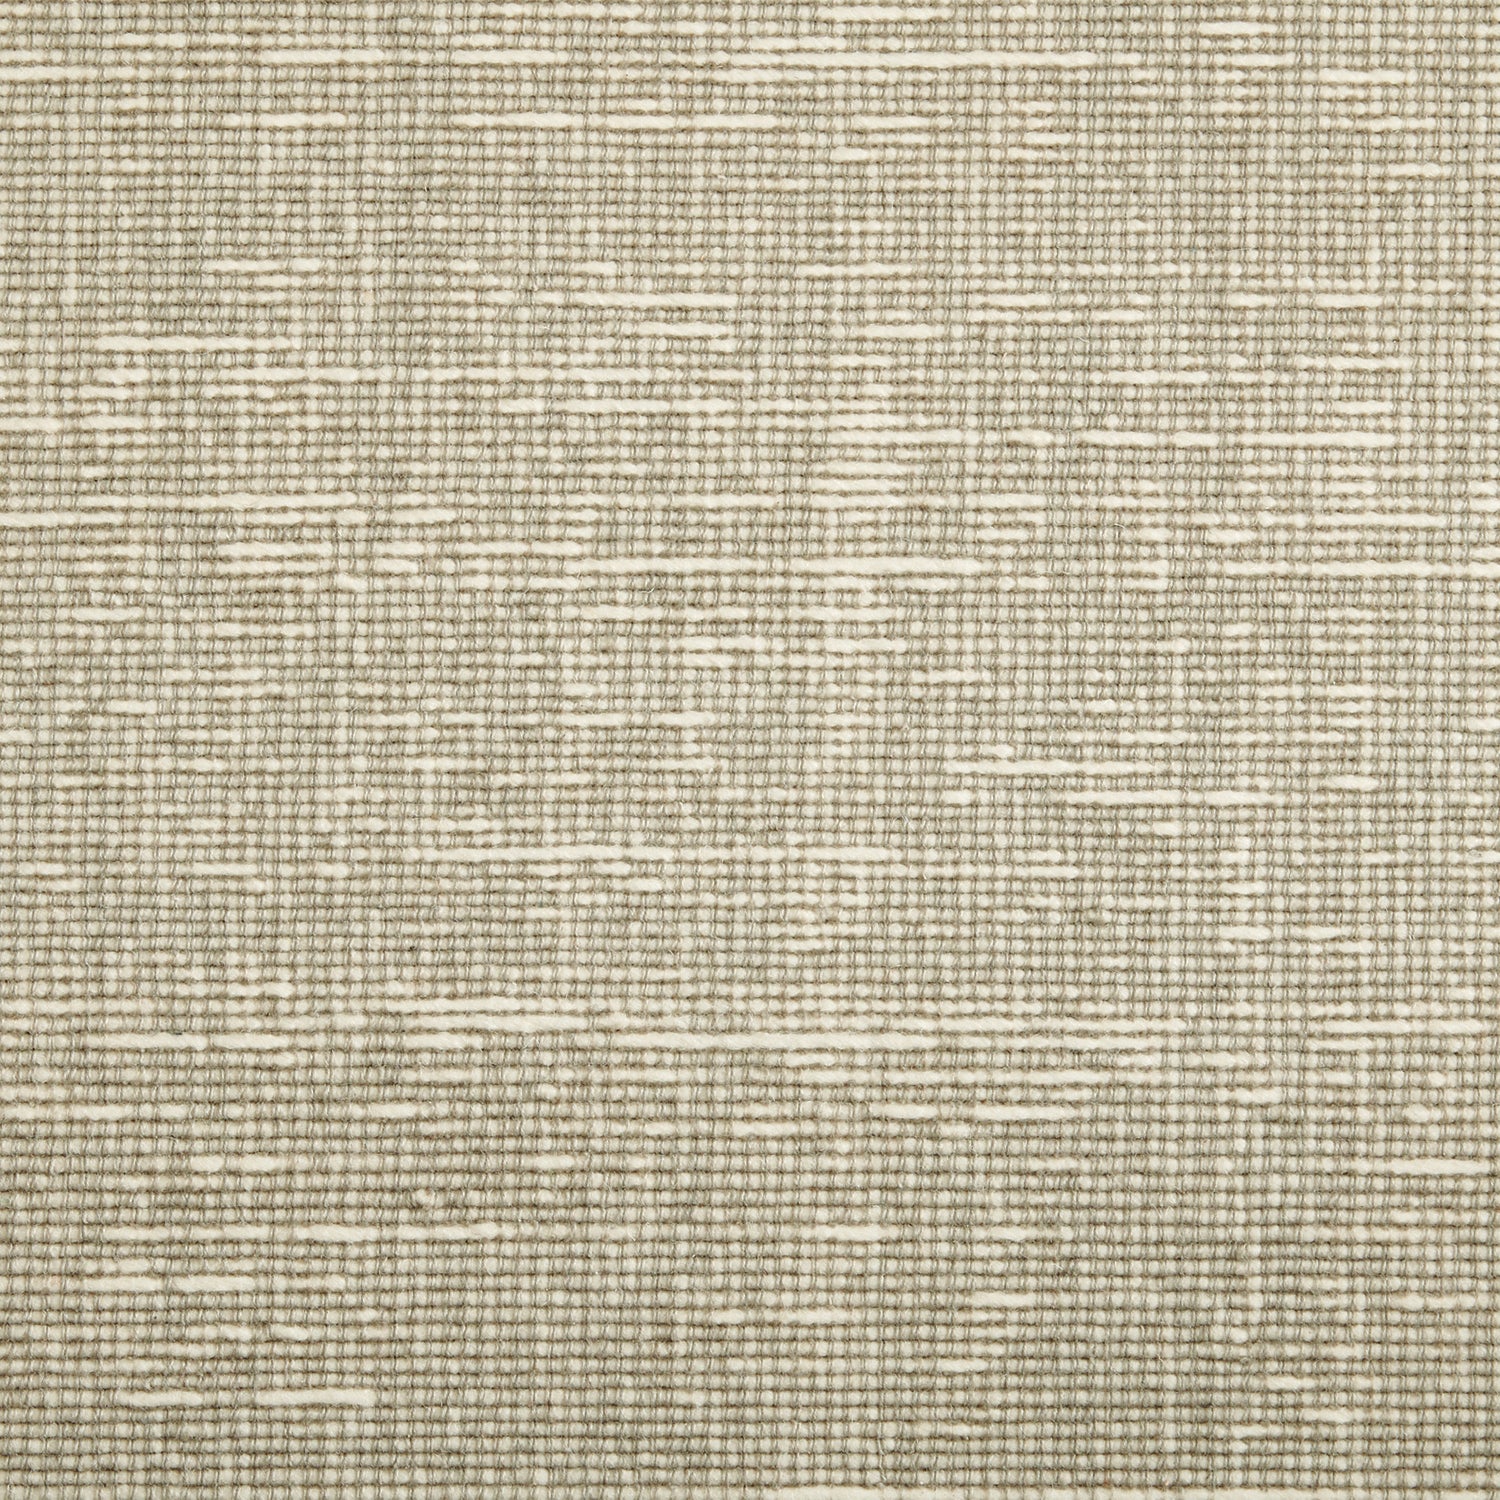 Wool broadloom carpet swatch in a chunky weave in mottled cream and sage.